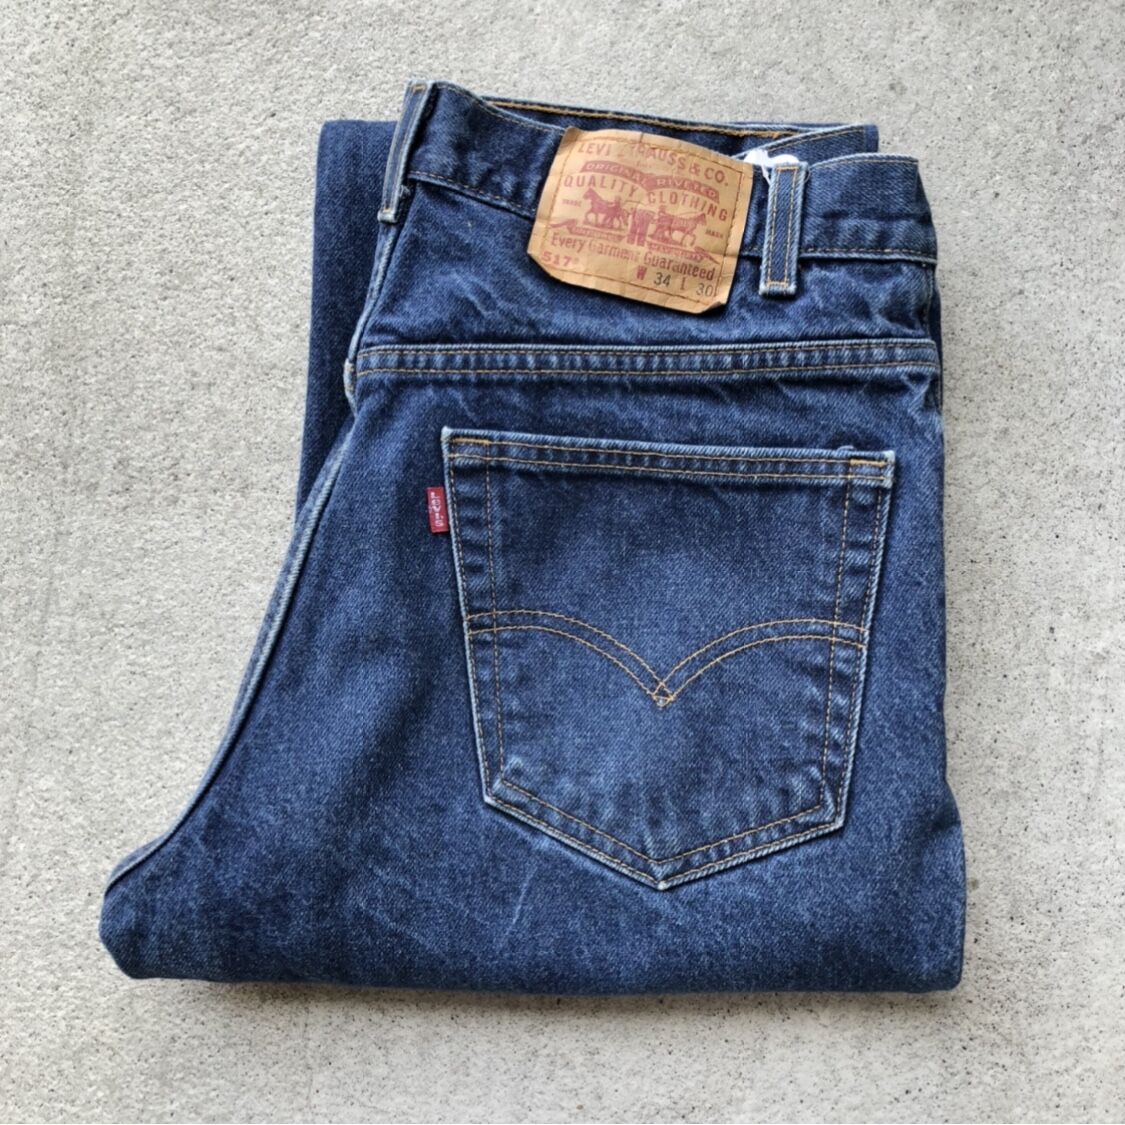 90s Levis リーバイス 517 bootcut w34